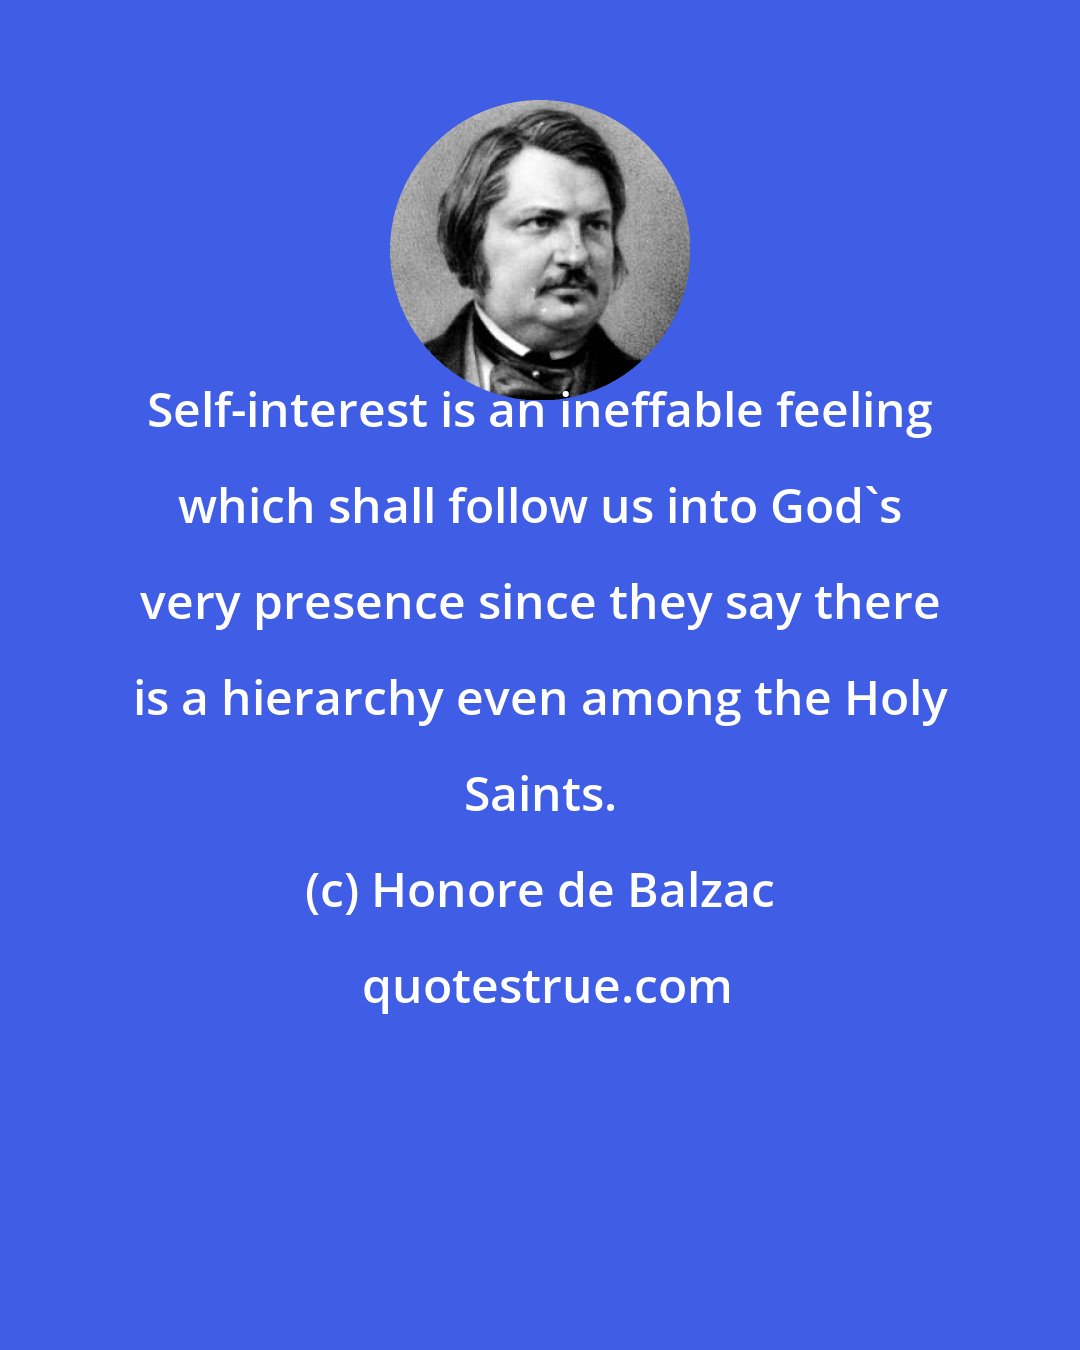 Honore de Balzac: Self-interest is an ineffable feeling which shall follow us into God's very presence since they say there is a hierarchy even among the Holy Saints.